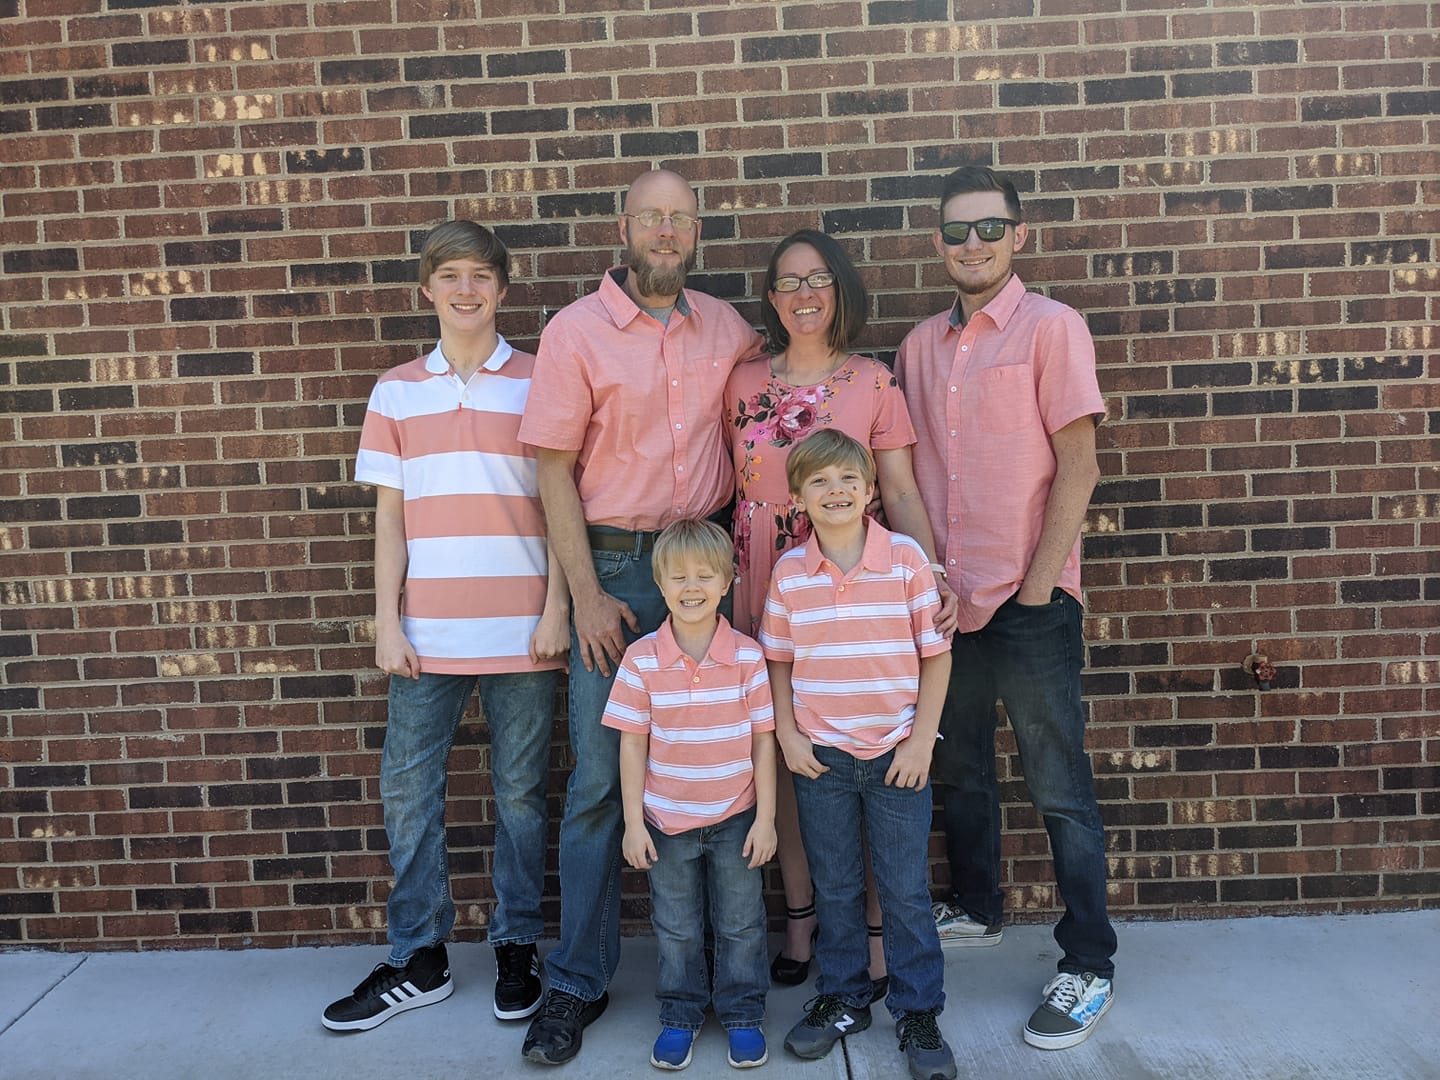 Classic family photo of happy family of 6 matching in pink